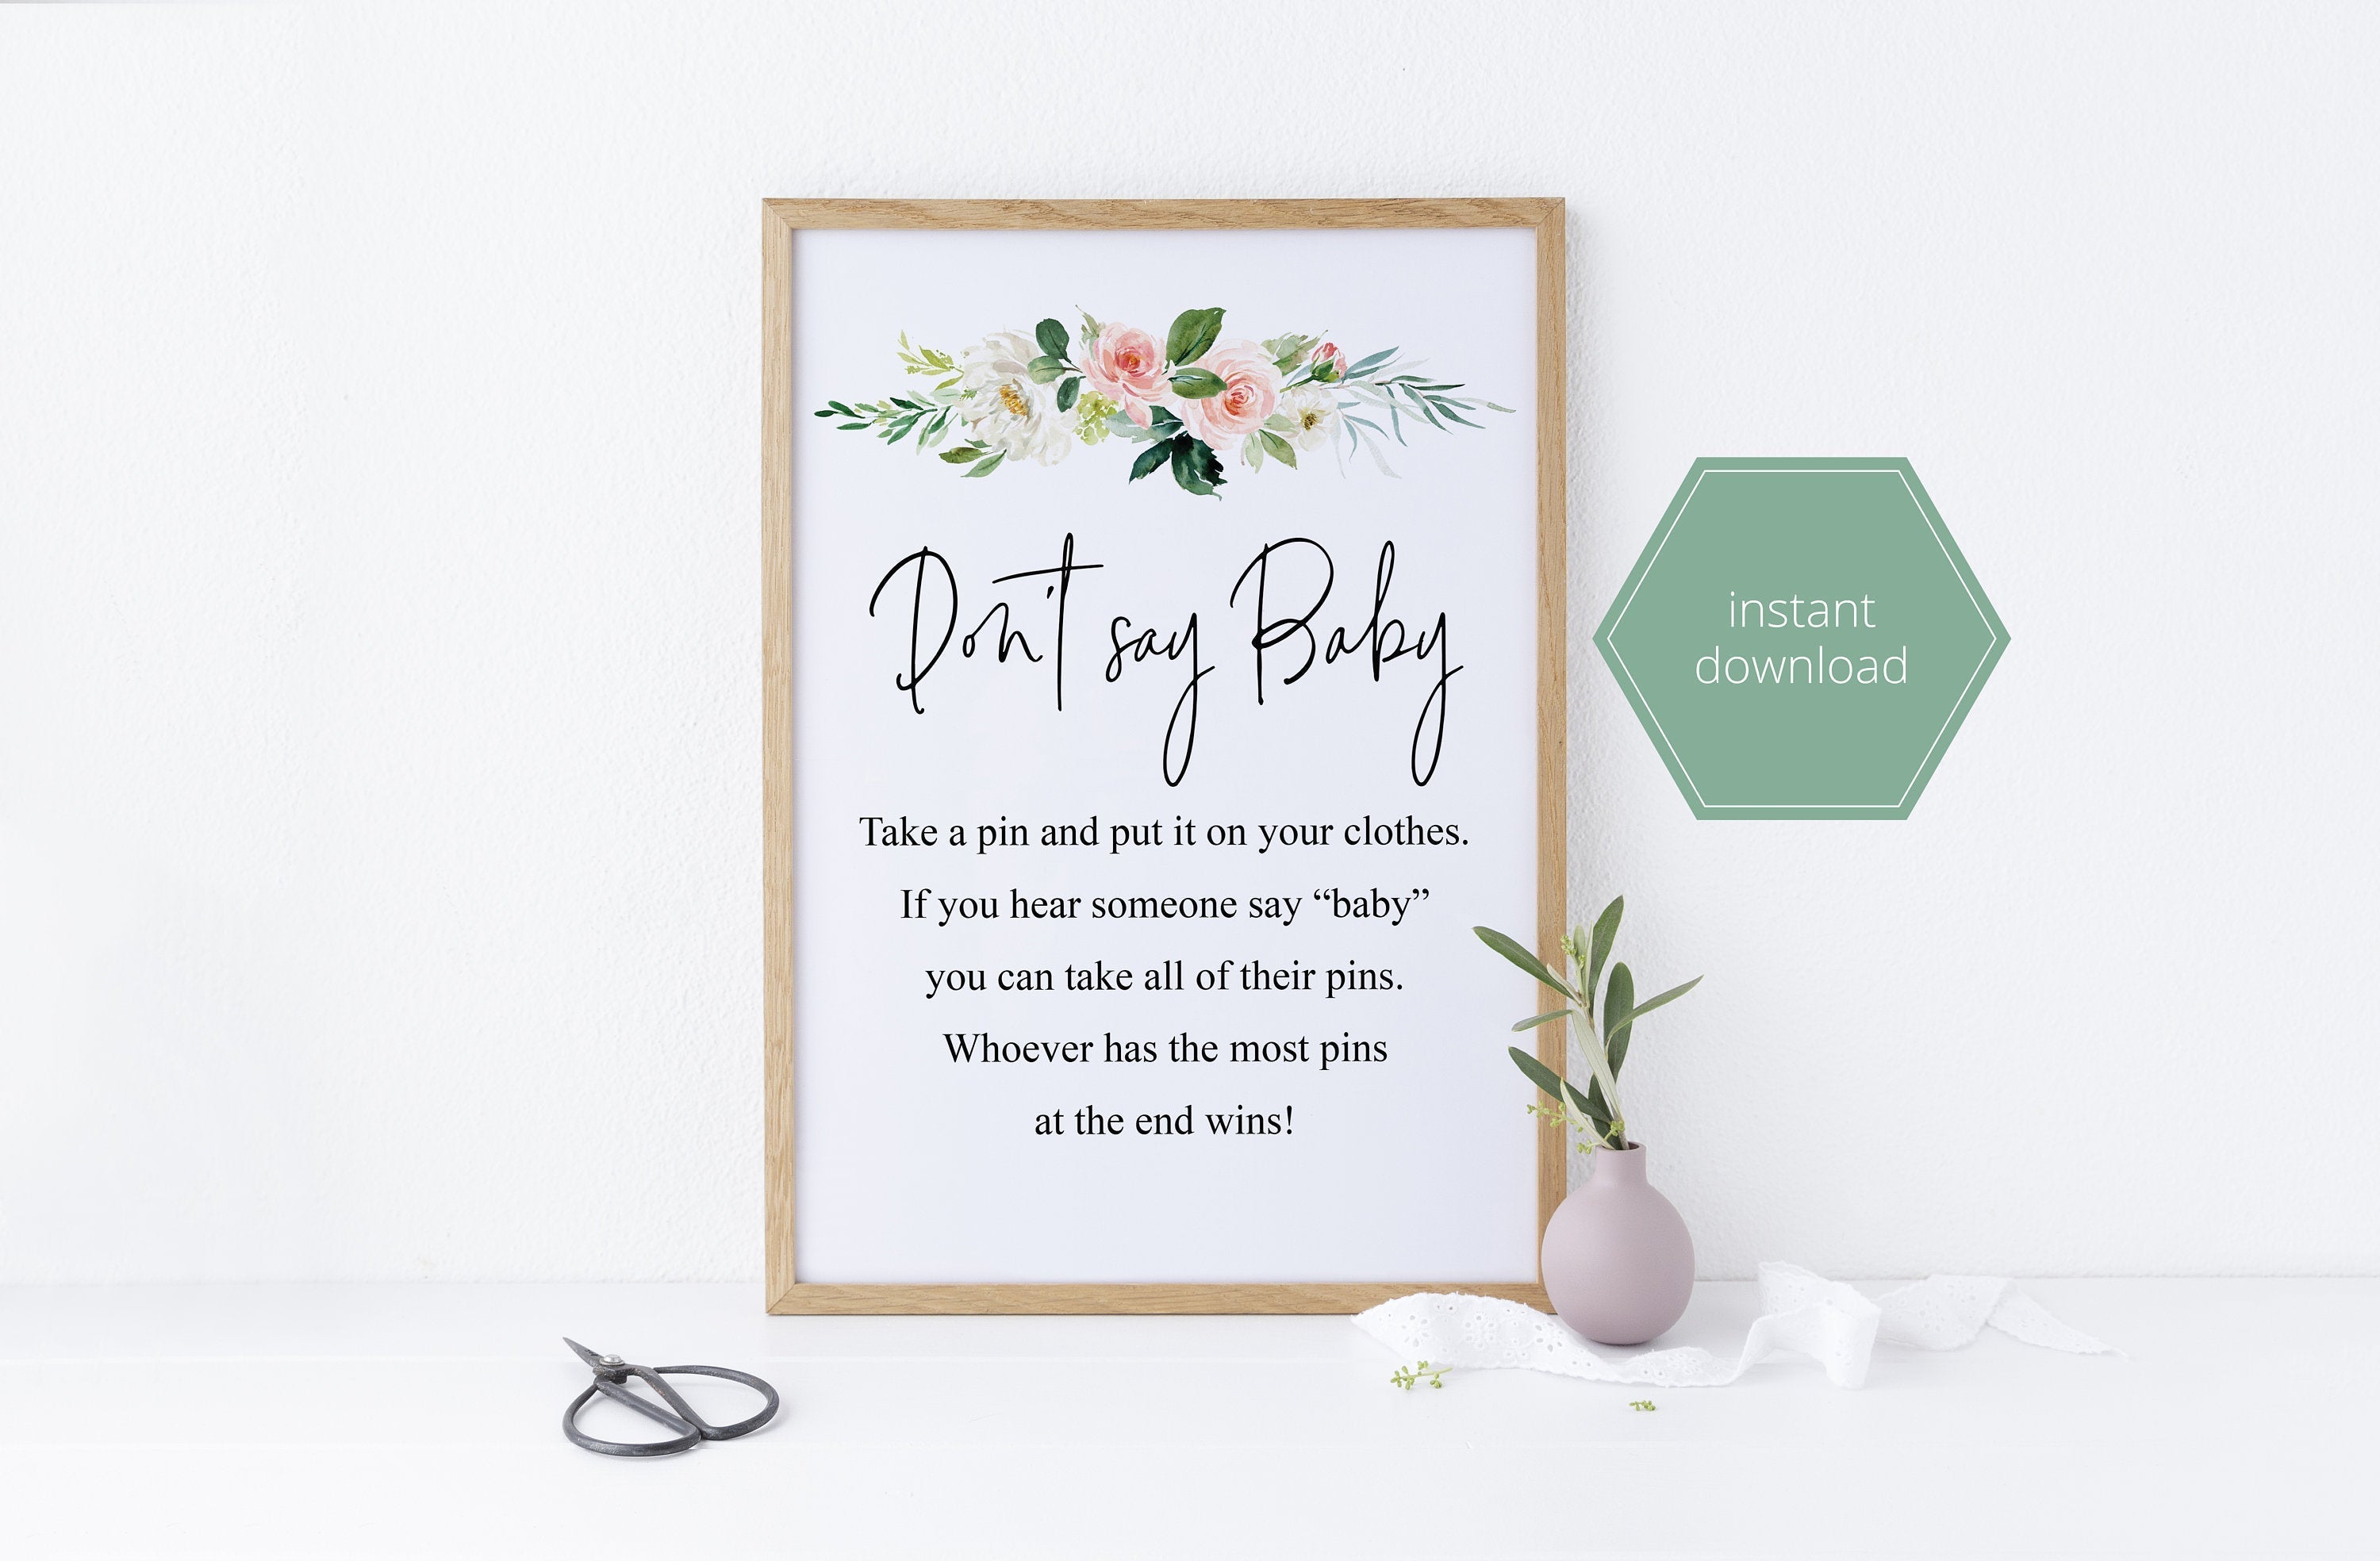 Pin on baby shower games